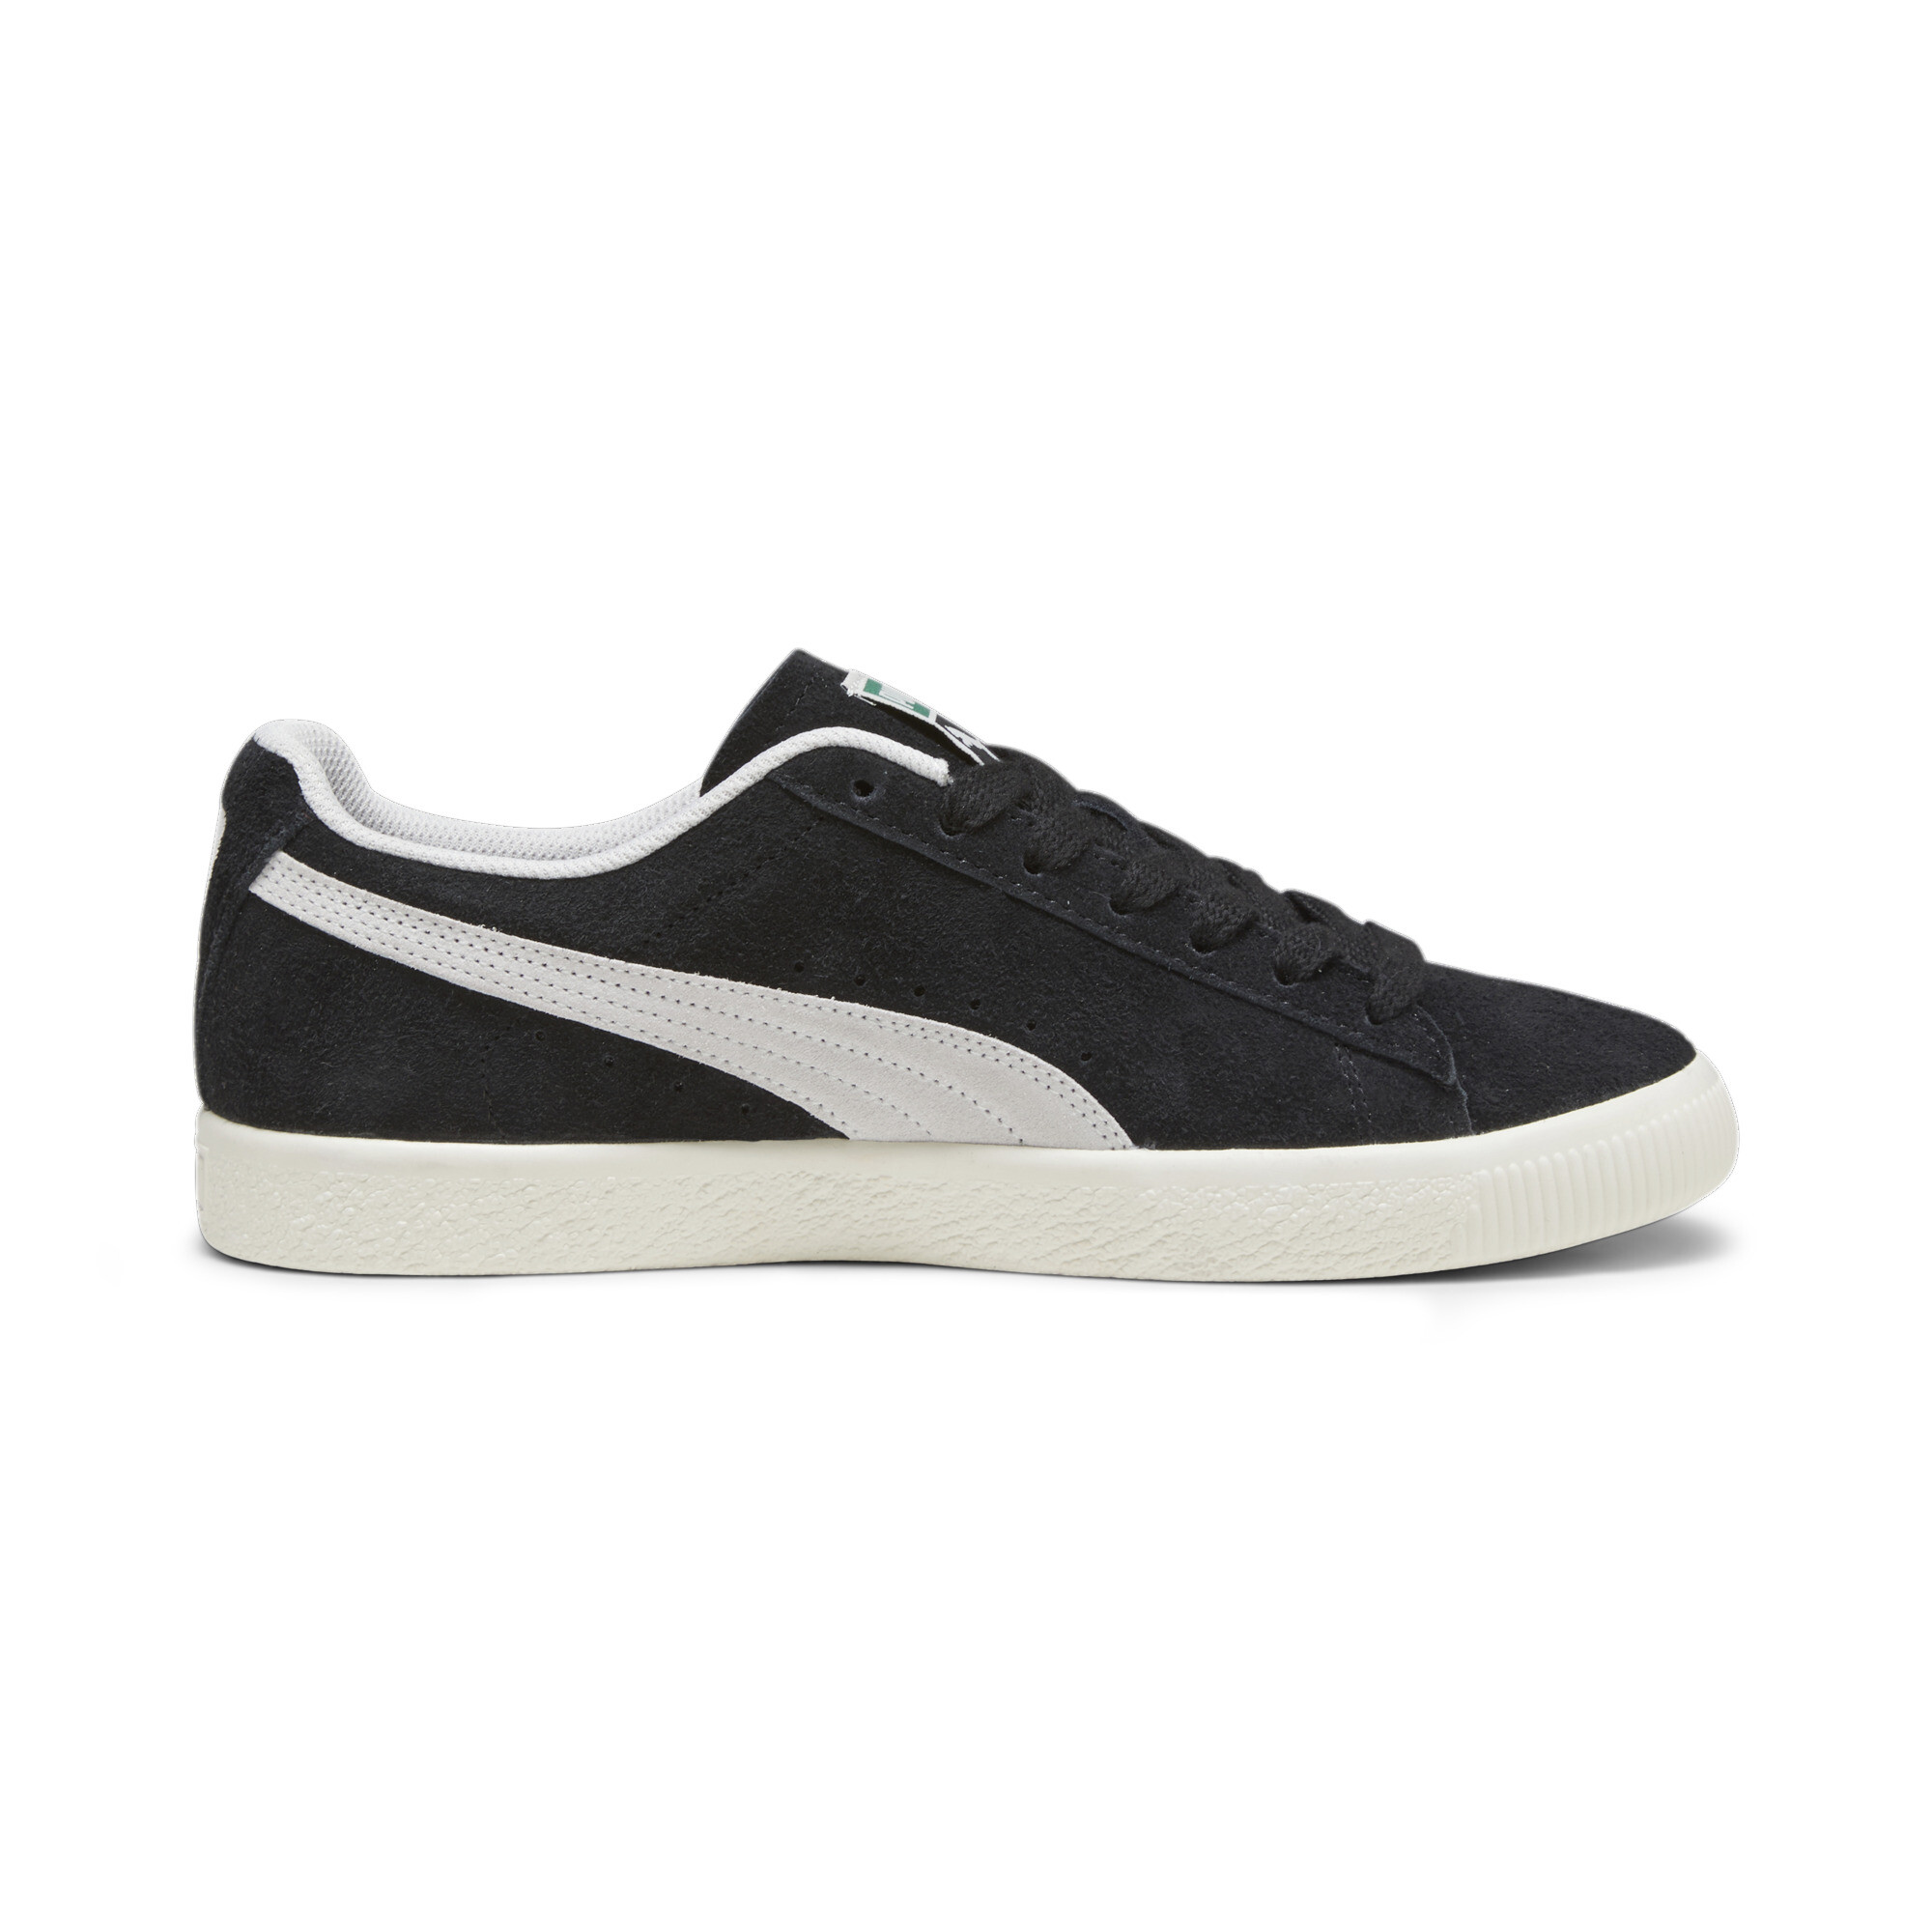 Men's PUMA Clyde Hairy Suede Sneakers In Black, Size EU 45